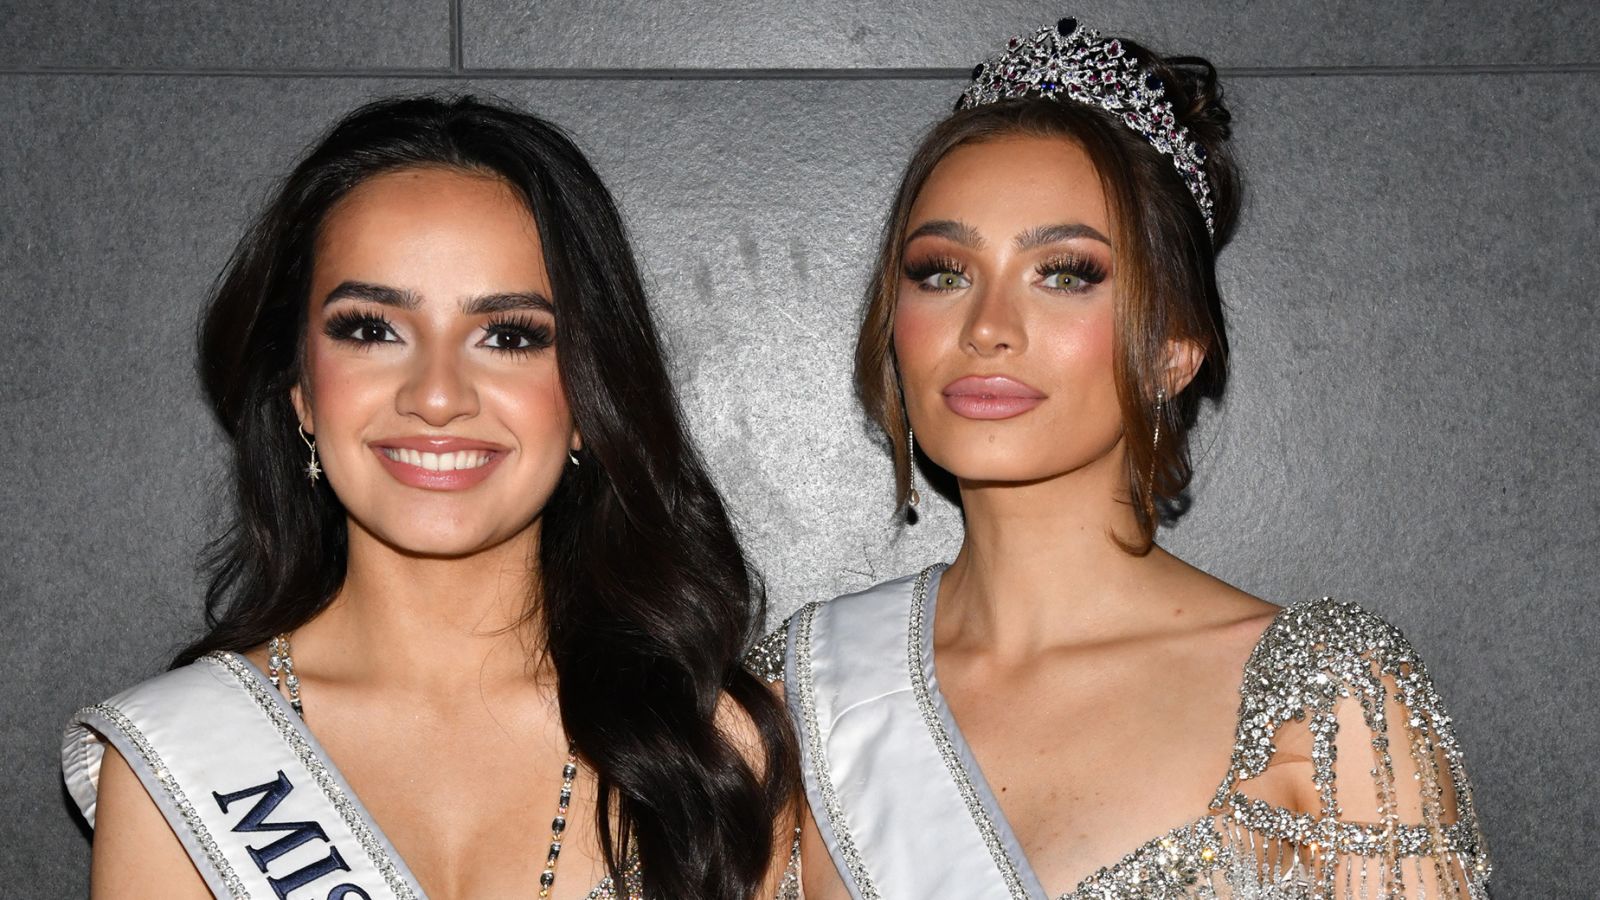 The shocking resignations of two Miss USA pageants are just the tip of the iceberg, experts say